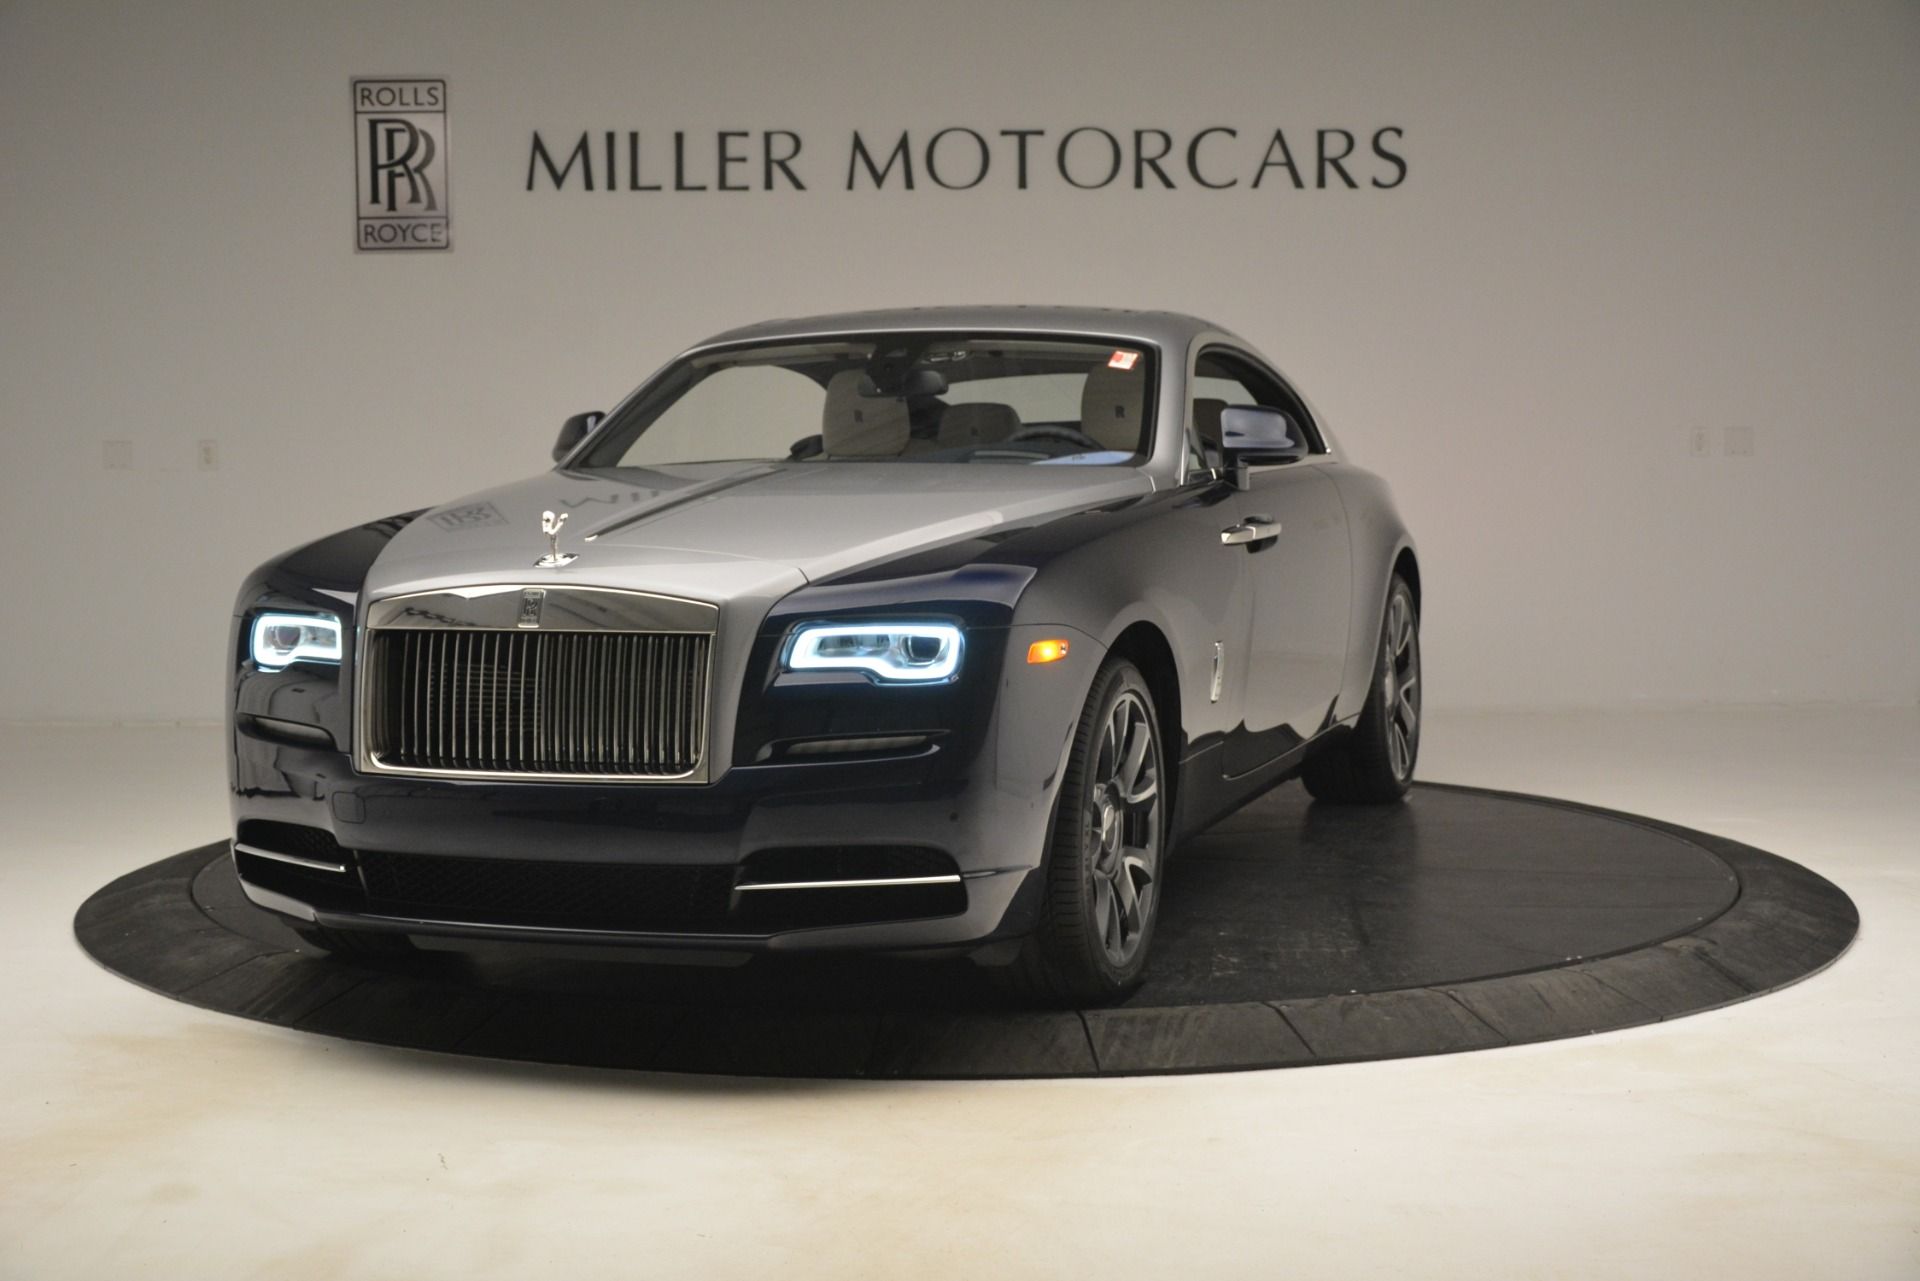 New 2019 Rolls Royce Wraith (Special Pricing). Rolls